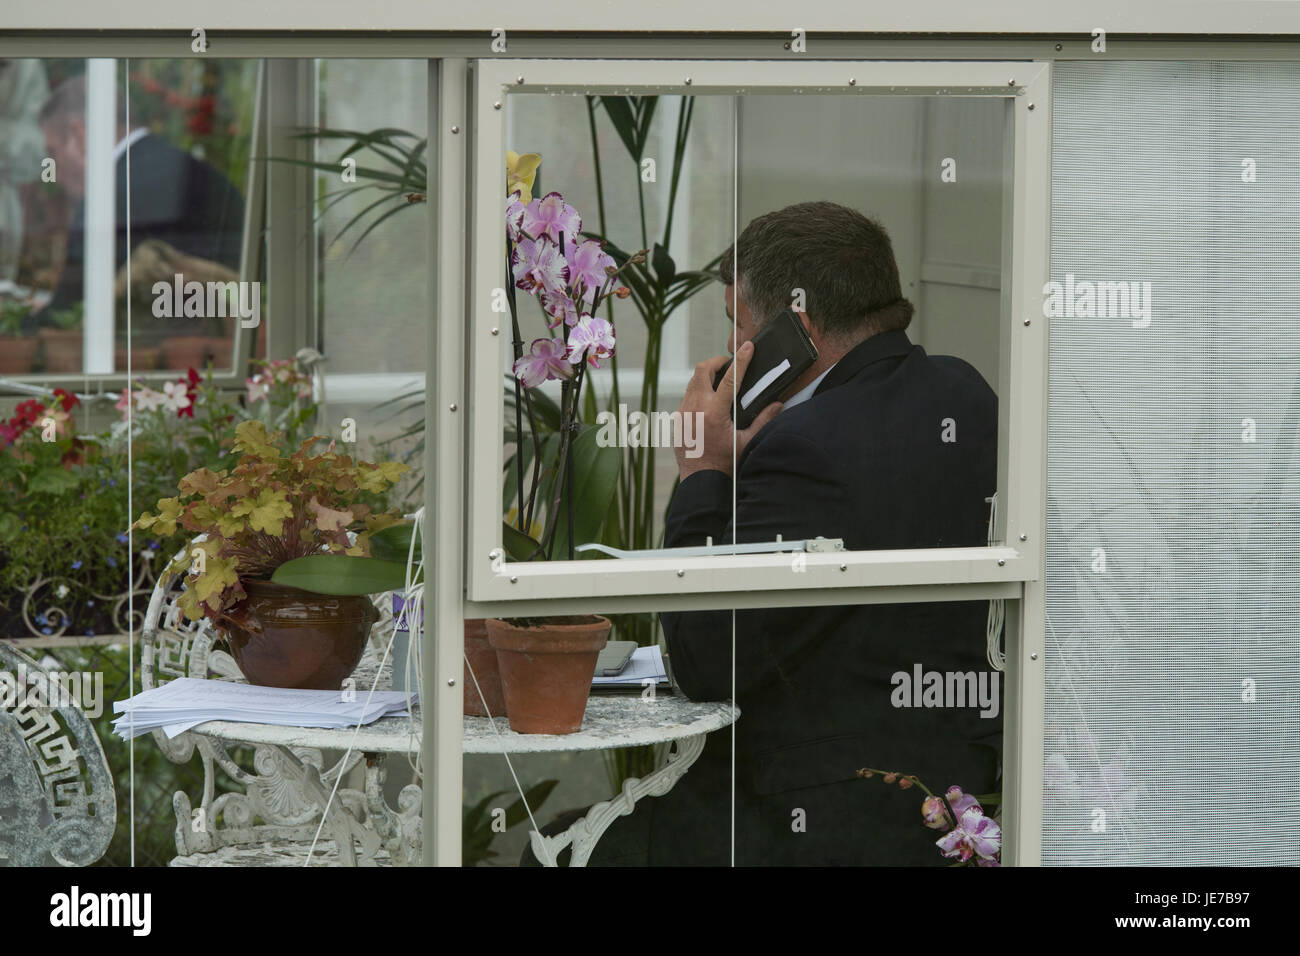 Salesman on phone, sits in display greenhouse on Hartley Botanic trade stand - RHS Chatsworth Flower Show, Chatsworth House, Derbyshire, England, UK. Stock Photo